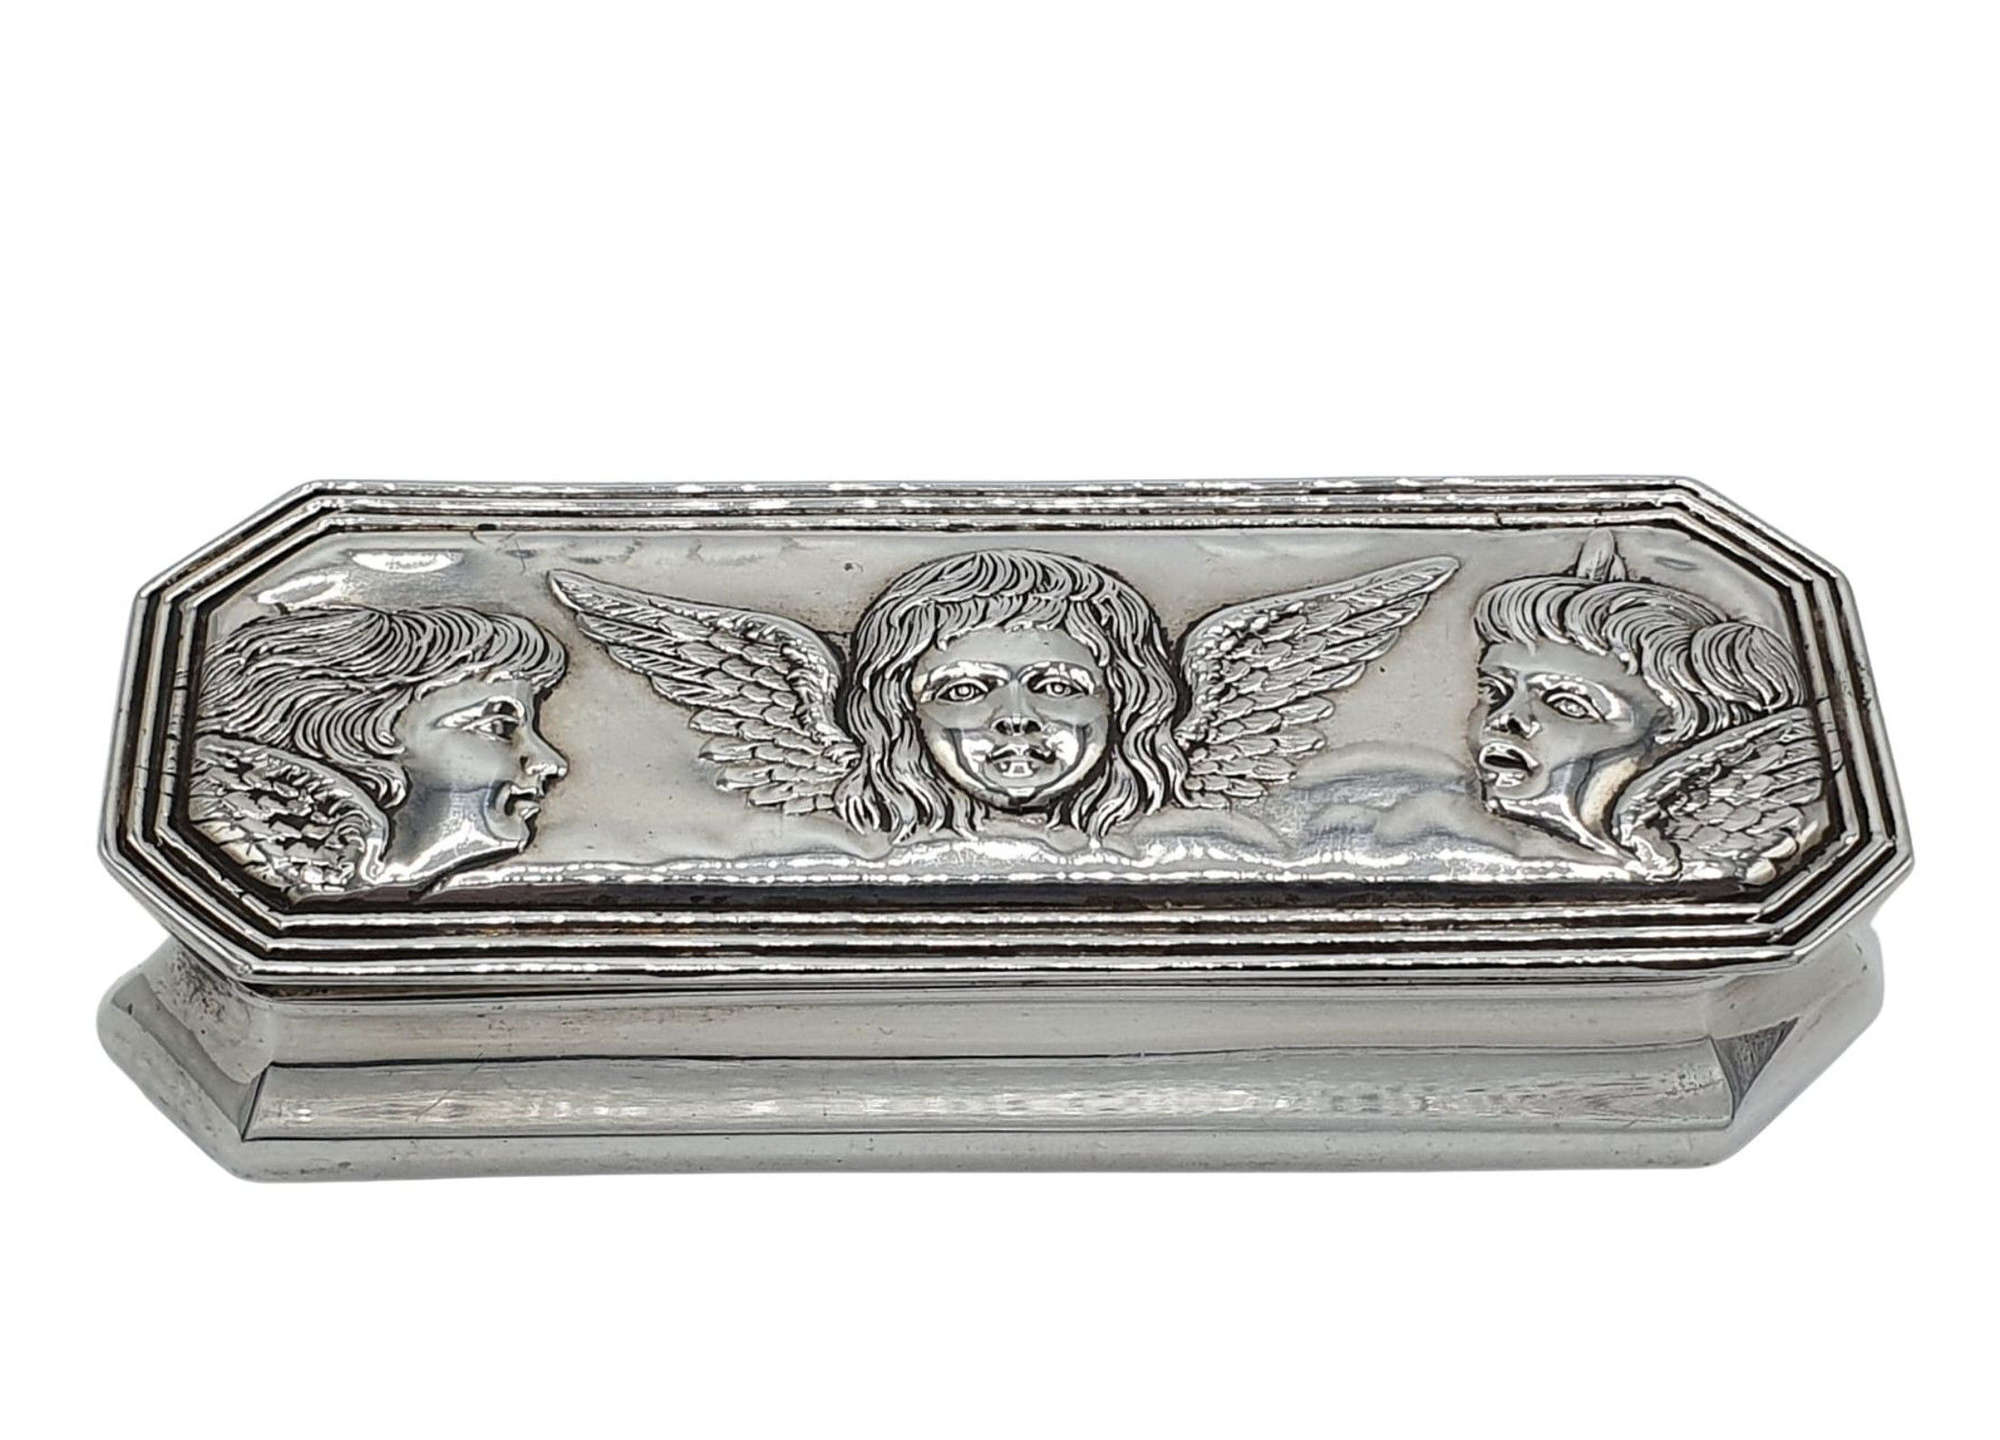 19th Century Sterling Silver Box Embossed With Repousse Cherubs